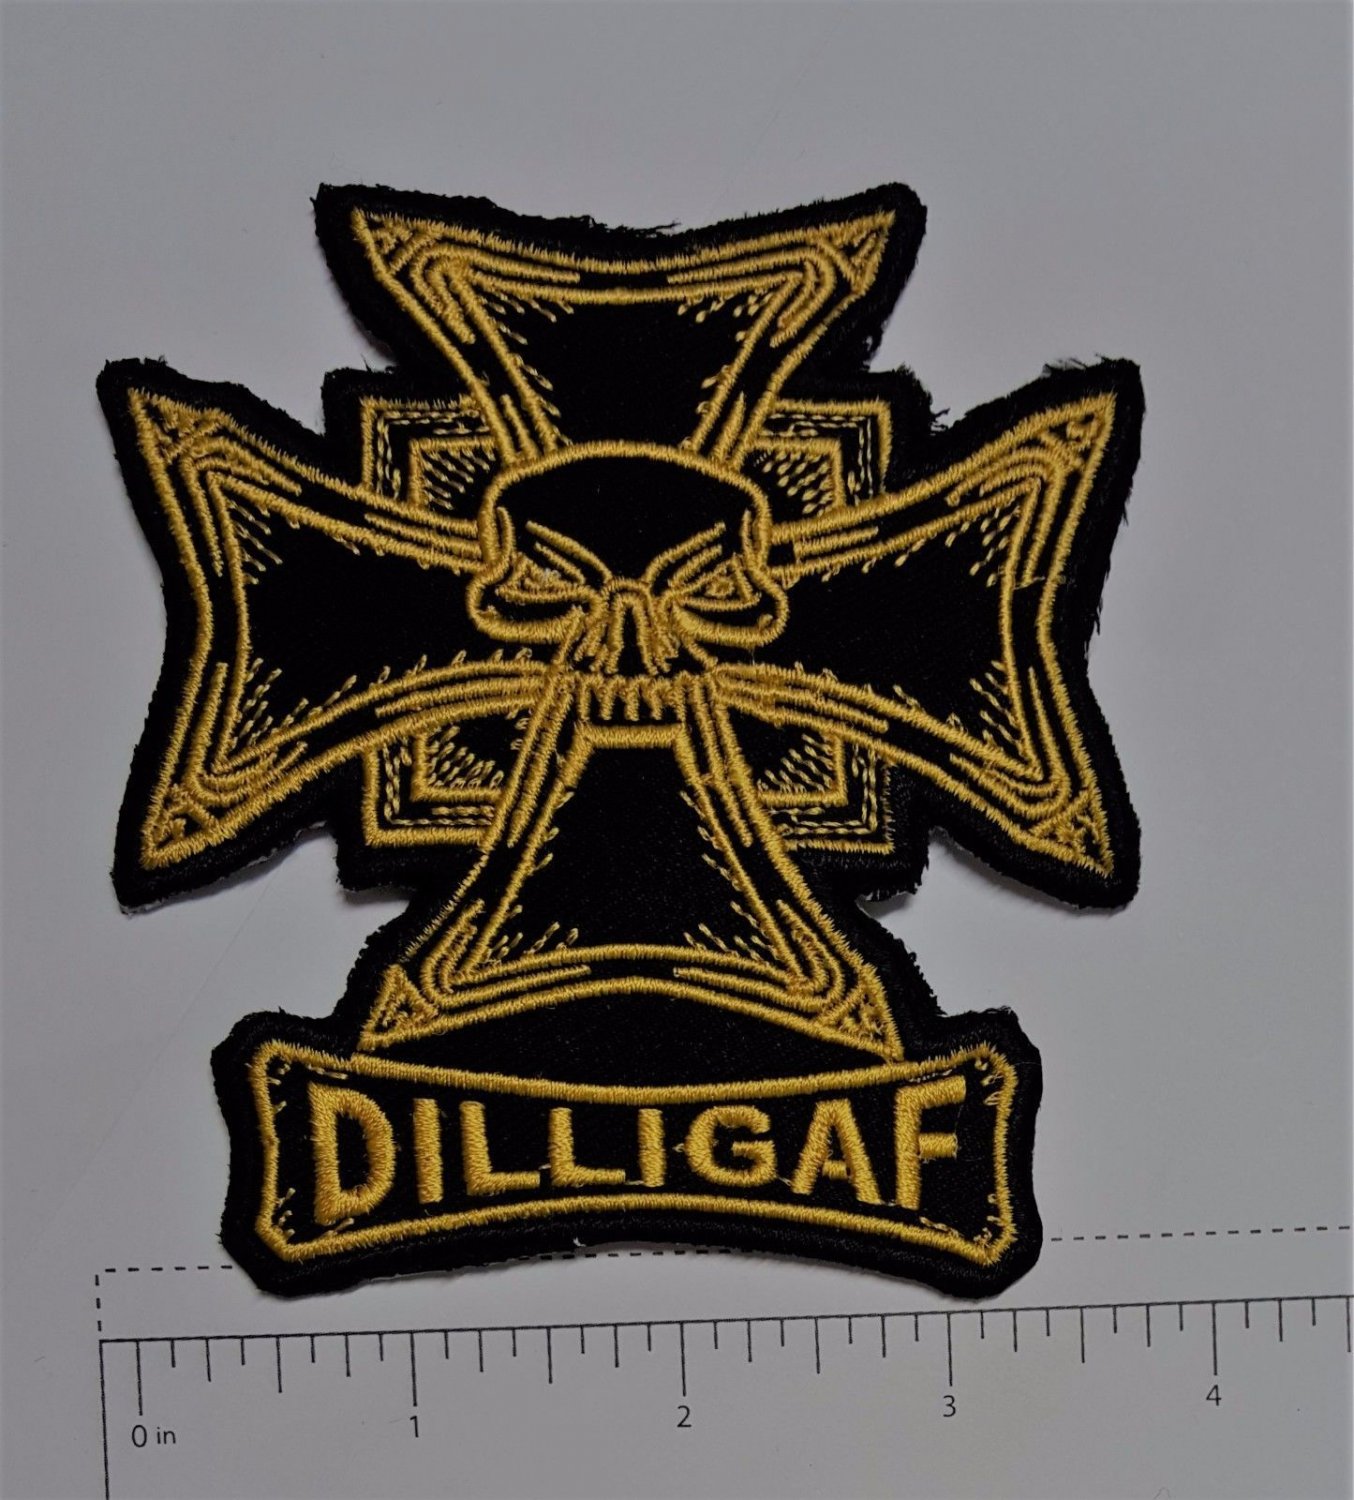 Dilligaf Skull Outlaw Biker Funny Motorcycle Iron On Small Patch